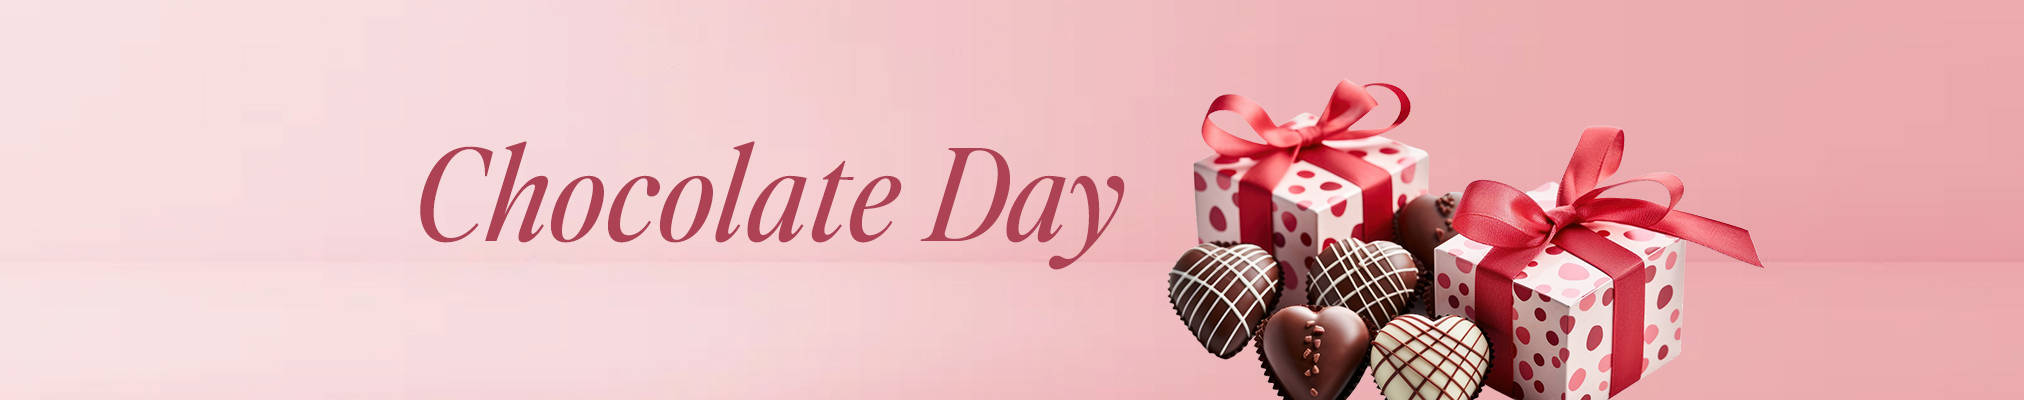 Chocolate Day Banner